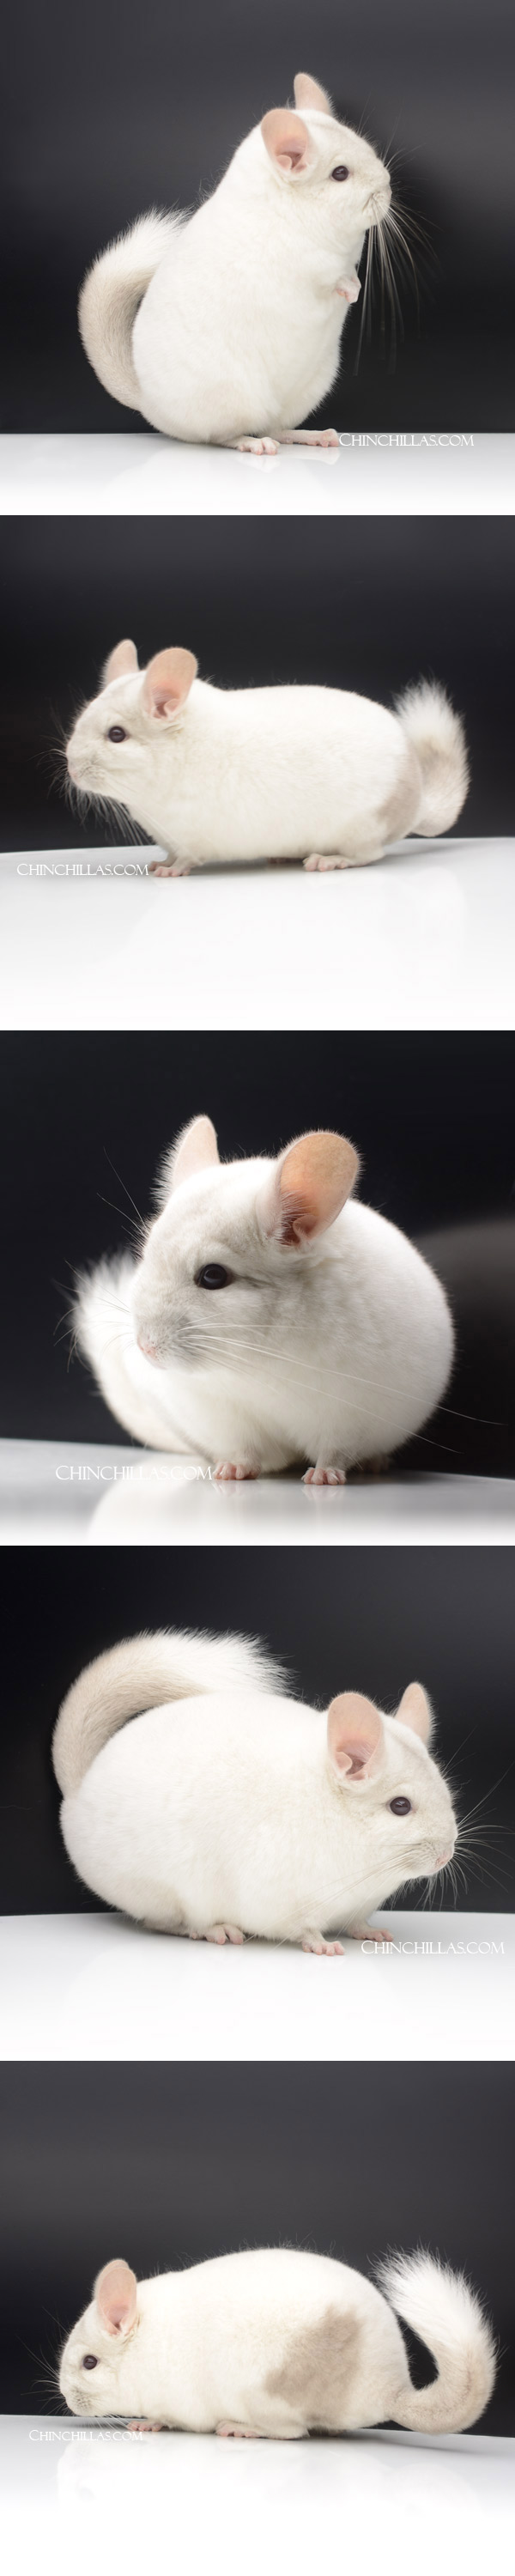 Chinchilla or related item offered for sale or export on Chinchillas.com - 23148 Show Quality Beige & White Mosaic Female Chinchilla with Body Spot